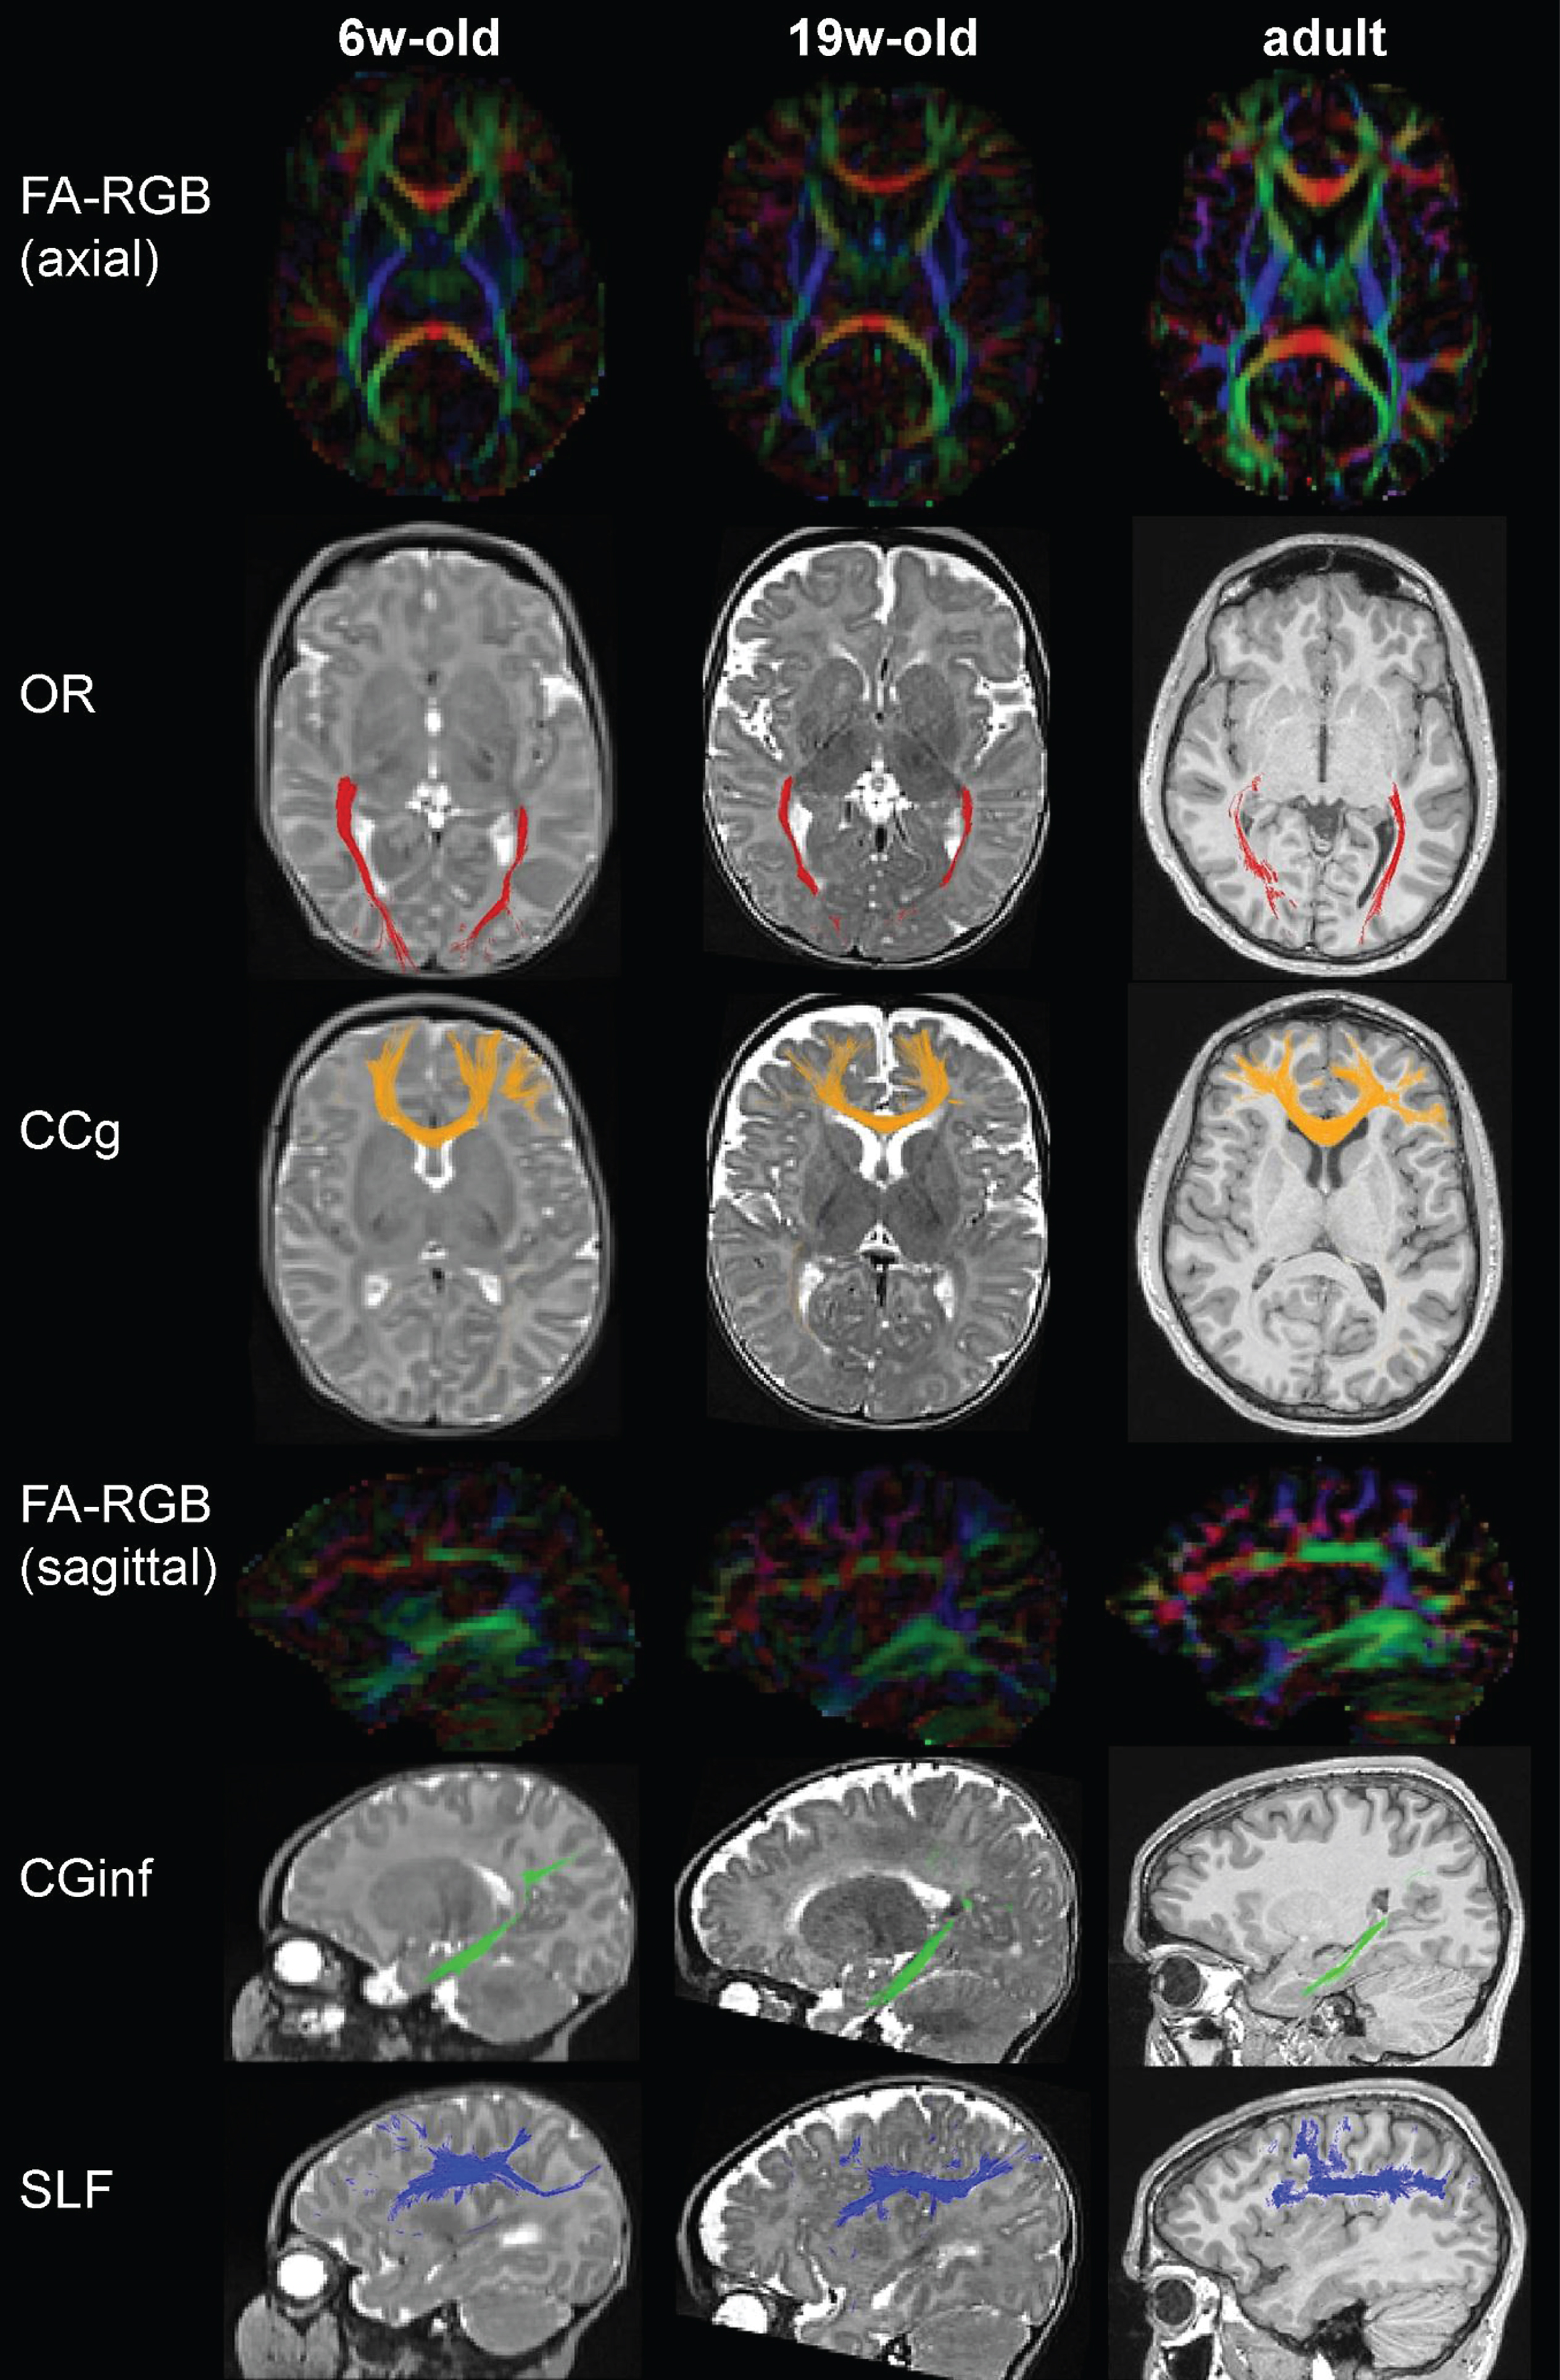 Main bundles assessed by tractography are similar in early life and adulthood. DTI color-coded directionality maps (FA-RGB) for two infants of different ages (6 and 19 weeks old) and a young adult, on axial and sagittal views, and tract reconstructions superposed to anatomical images (T2-weighted in infants, T1-weighted in adult) for four examples of bundles (projection: optic radiations OR, commissural: genu of the corpus callosum CCg, limbic: inferior branch of the cingulum CGinf, association: superior longitudinal fasciculus SLF). Other examples of tracts can be found in [7, 40, 43].